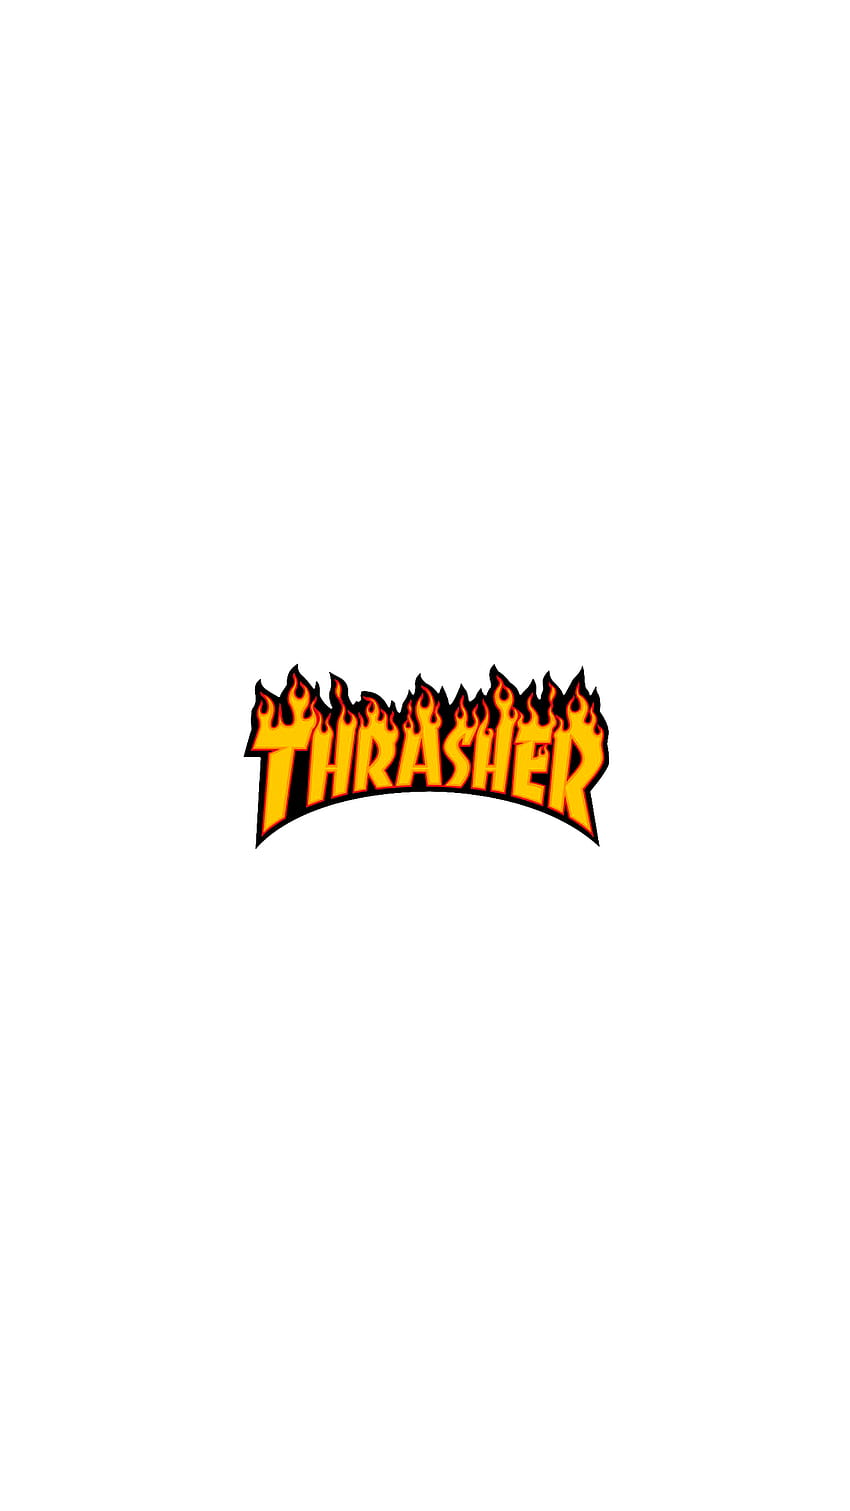 Thrasher wallpaper by Caleb134  Download on ZEDGE  a3ca